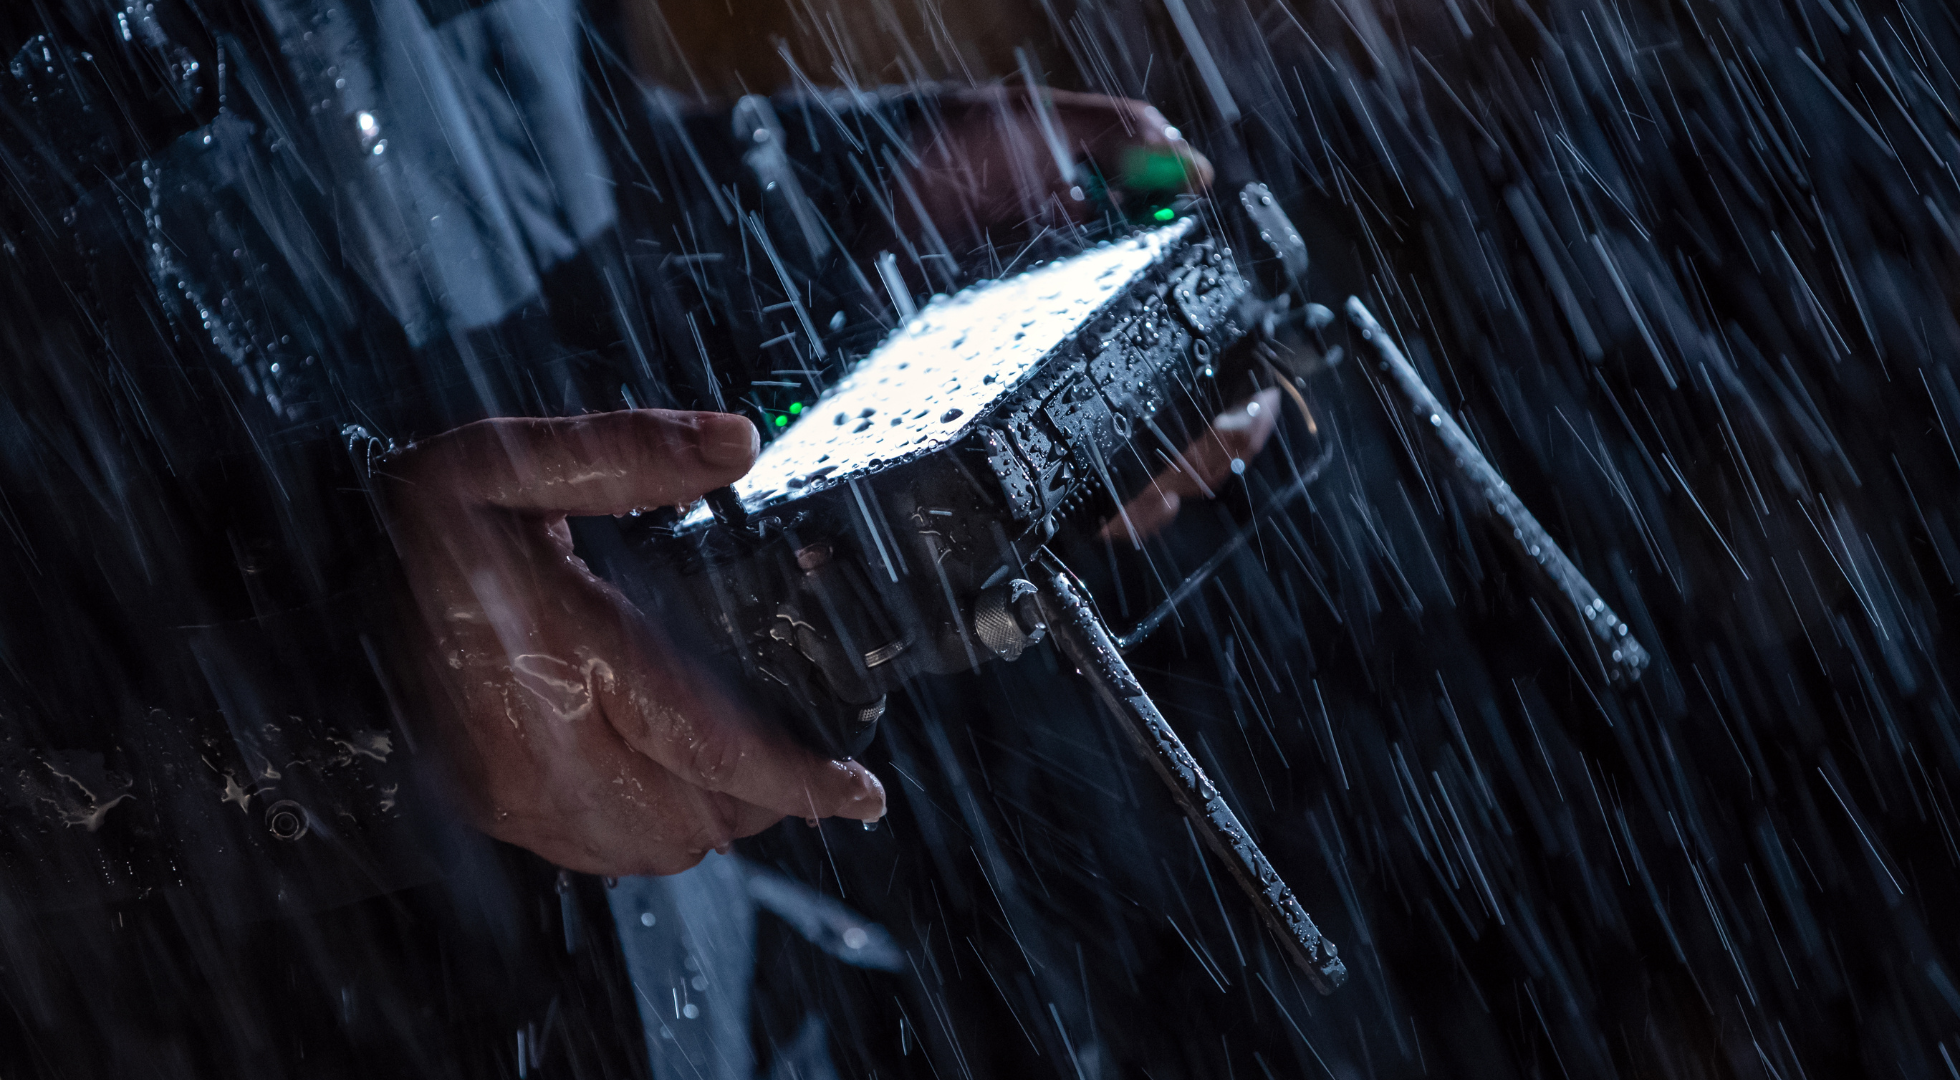 DJI RC Plus remote controller can handle wet weather.